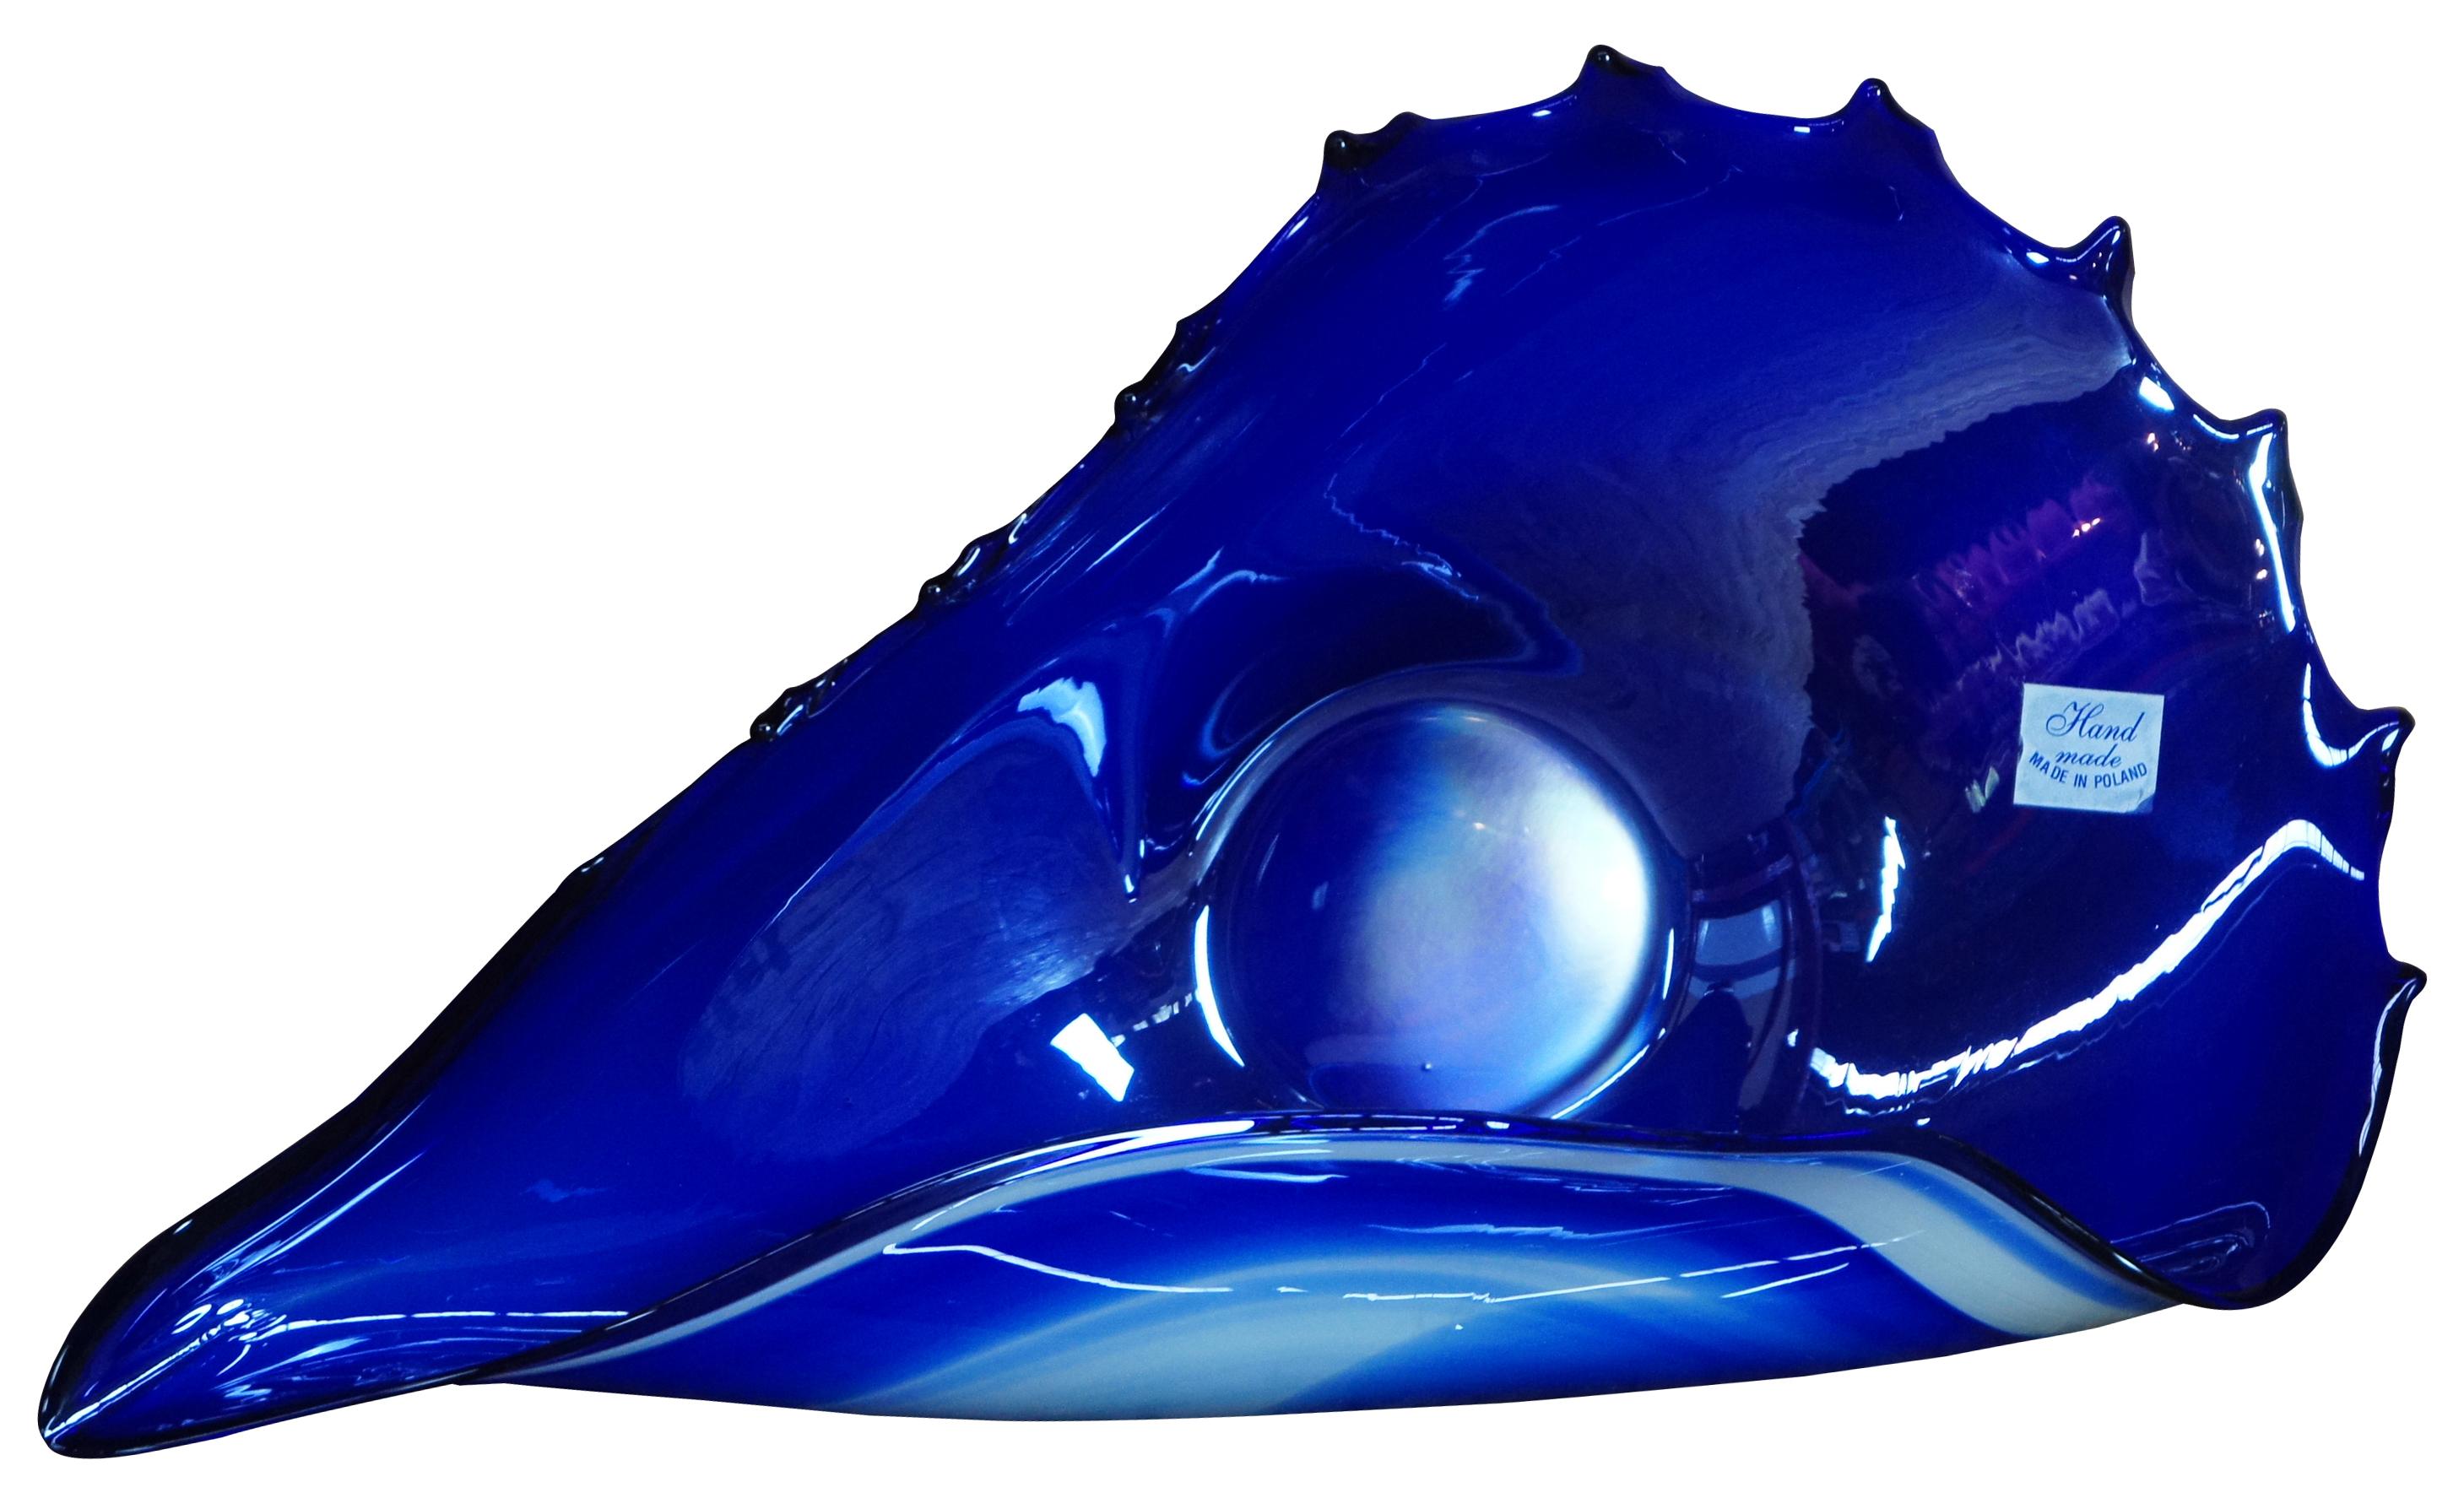 Vintage hand blown free form studio art glass bowl in blue and white, abstractly reminiscent of a seashell, made in Poland.
  